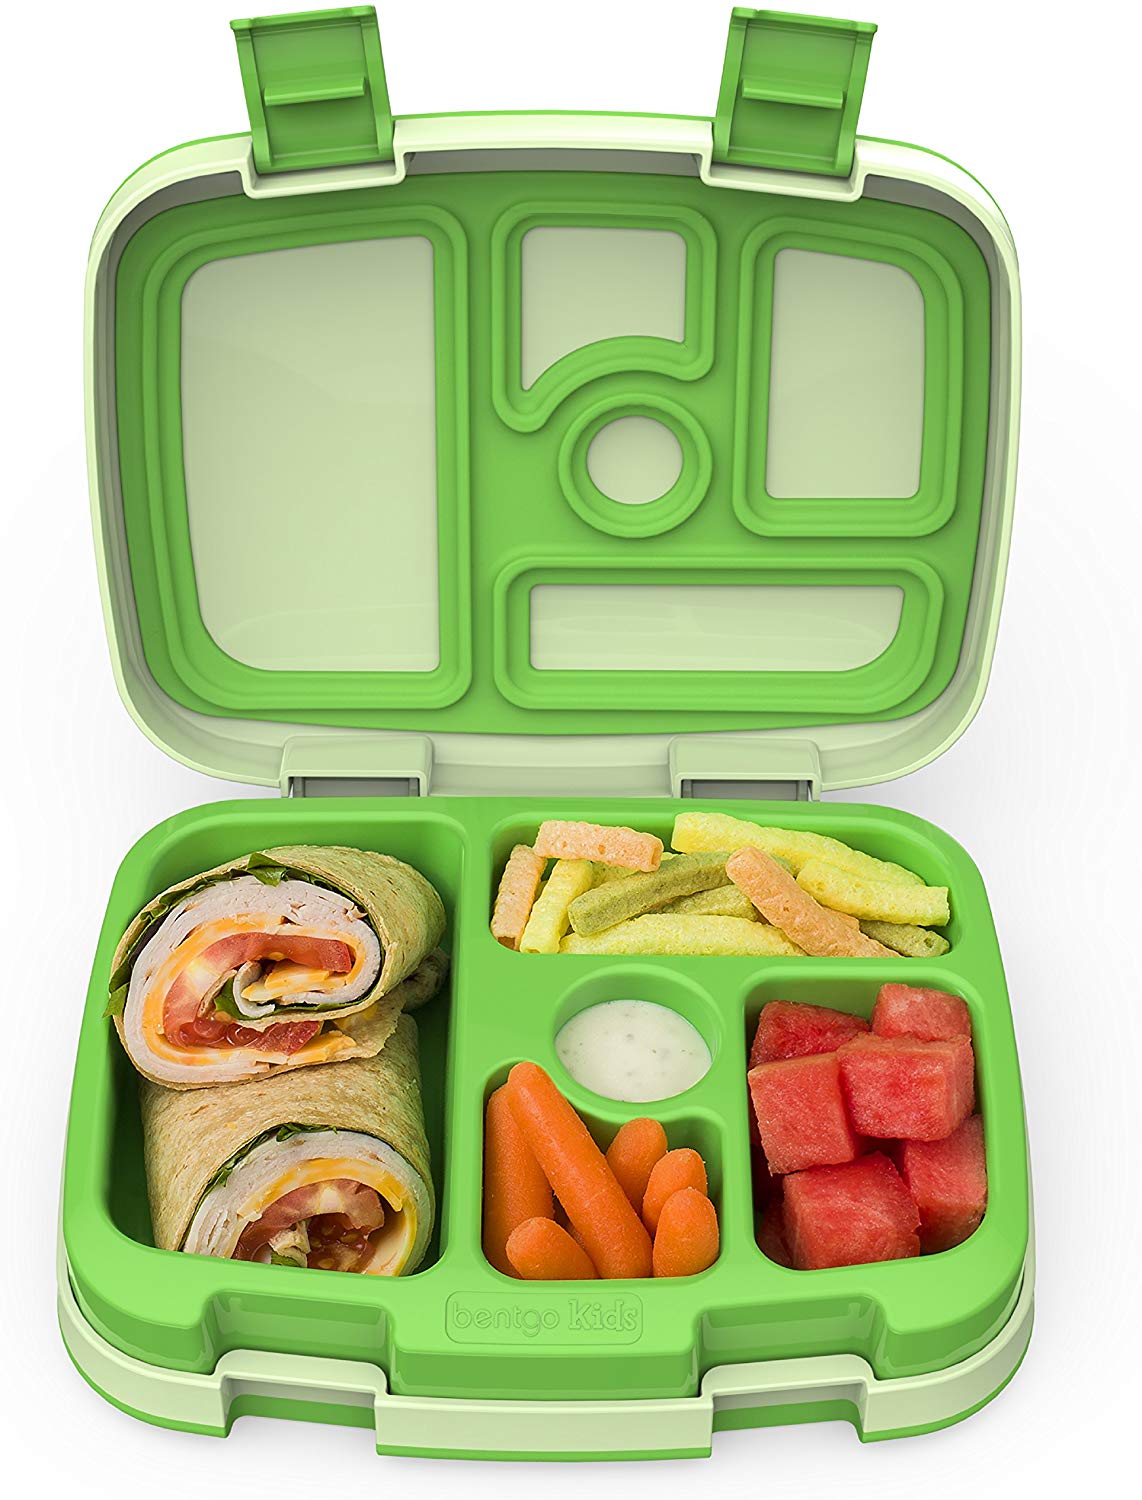 LOVINA Bento Boxes for Adults - 1100 ML Bento Lunch Box For Kids Childrens  With Spoon & Fork - Durab…See more LOVINA Bento Boxes for Adults - 1100 ML